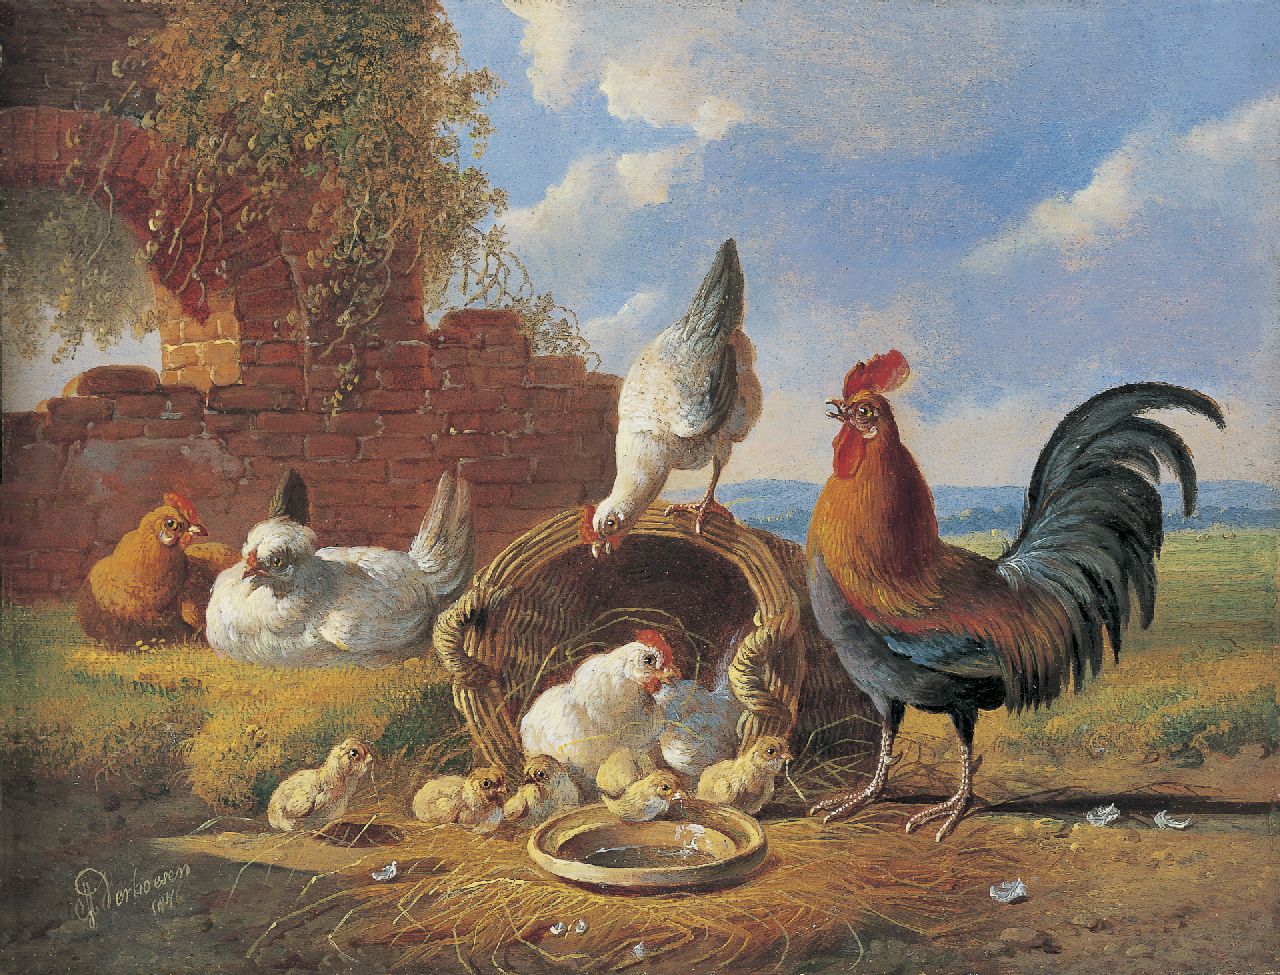 Verhoesen A.  | Albertus Verhoesen, Poultry in a classical landscape, oil on panel 18.6 x 24.1 cm, signed l.l. and dated 1876